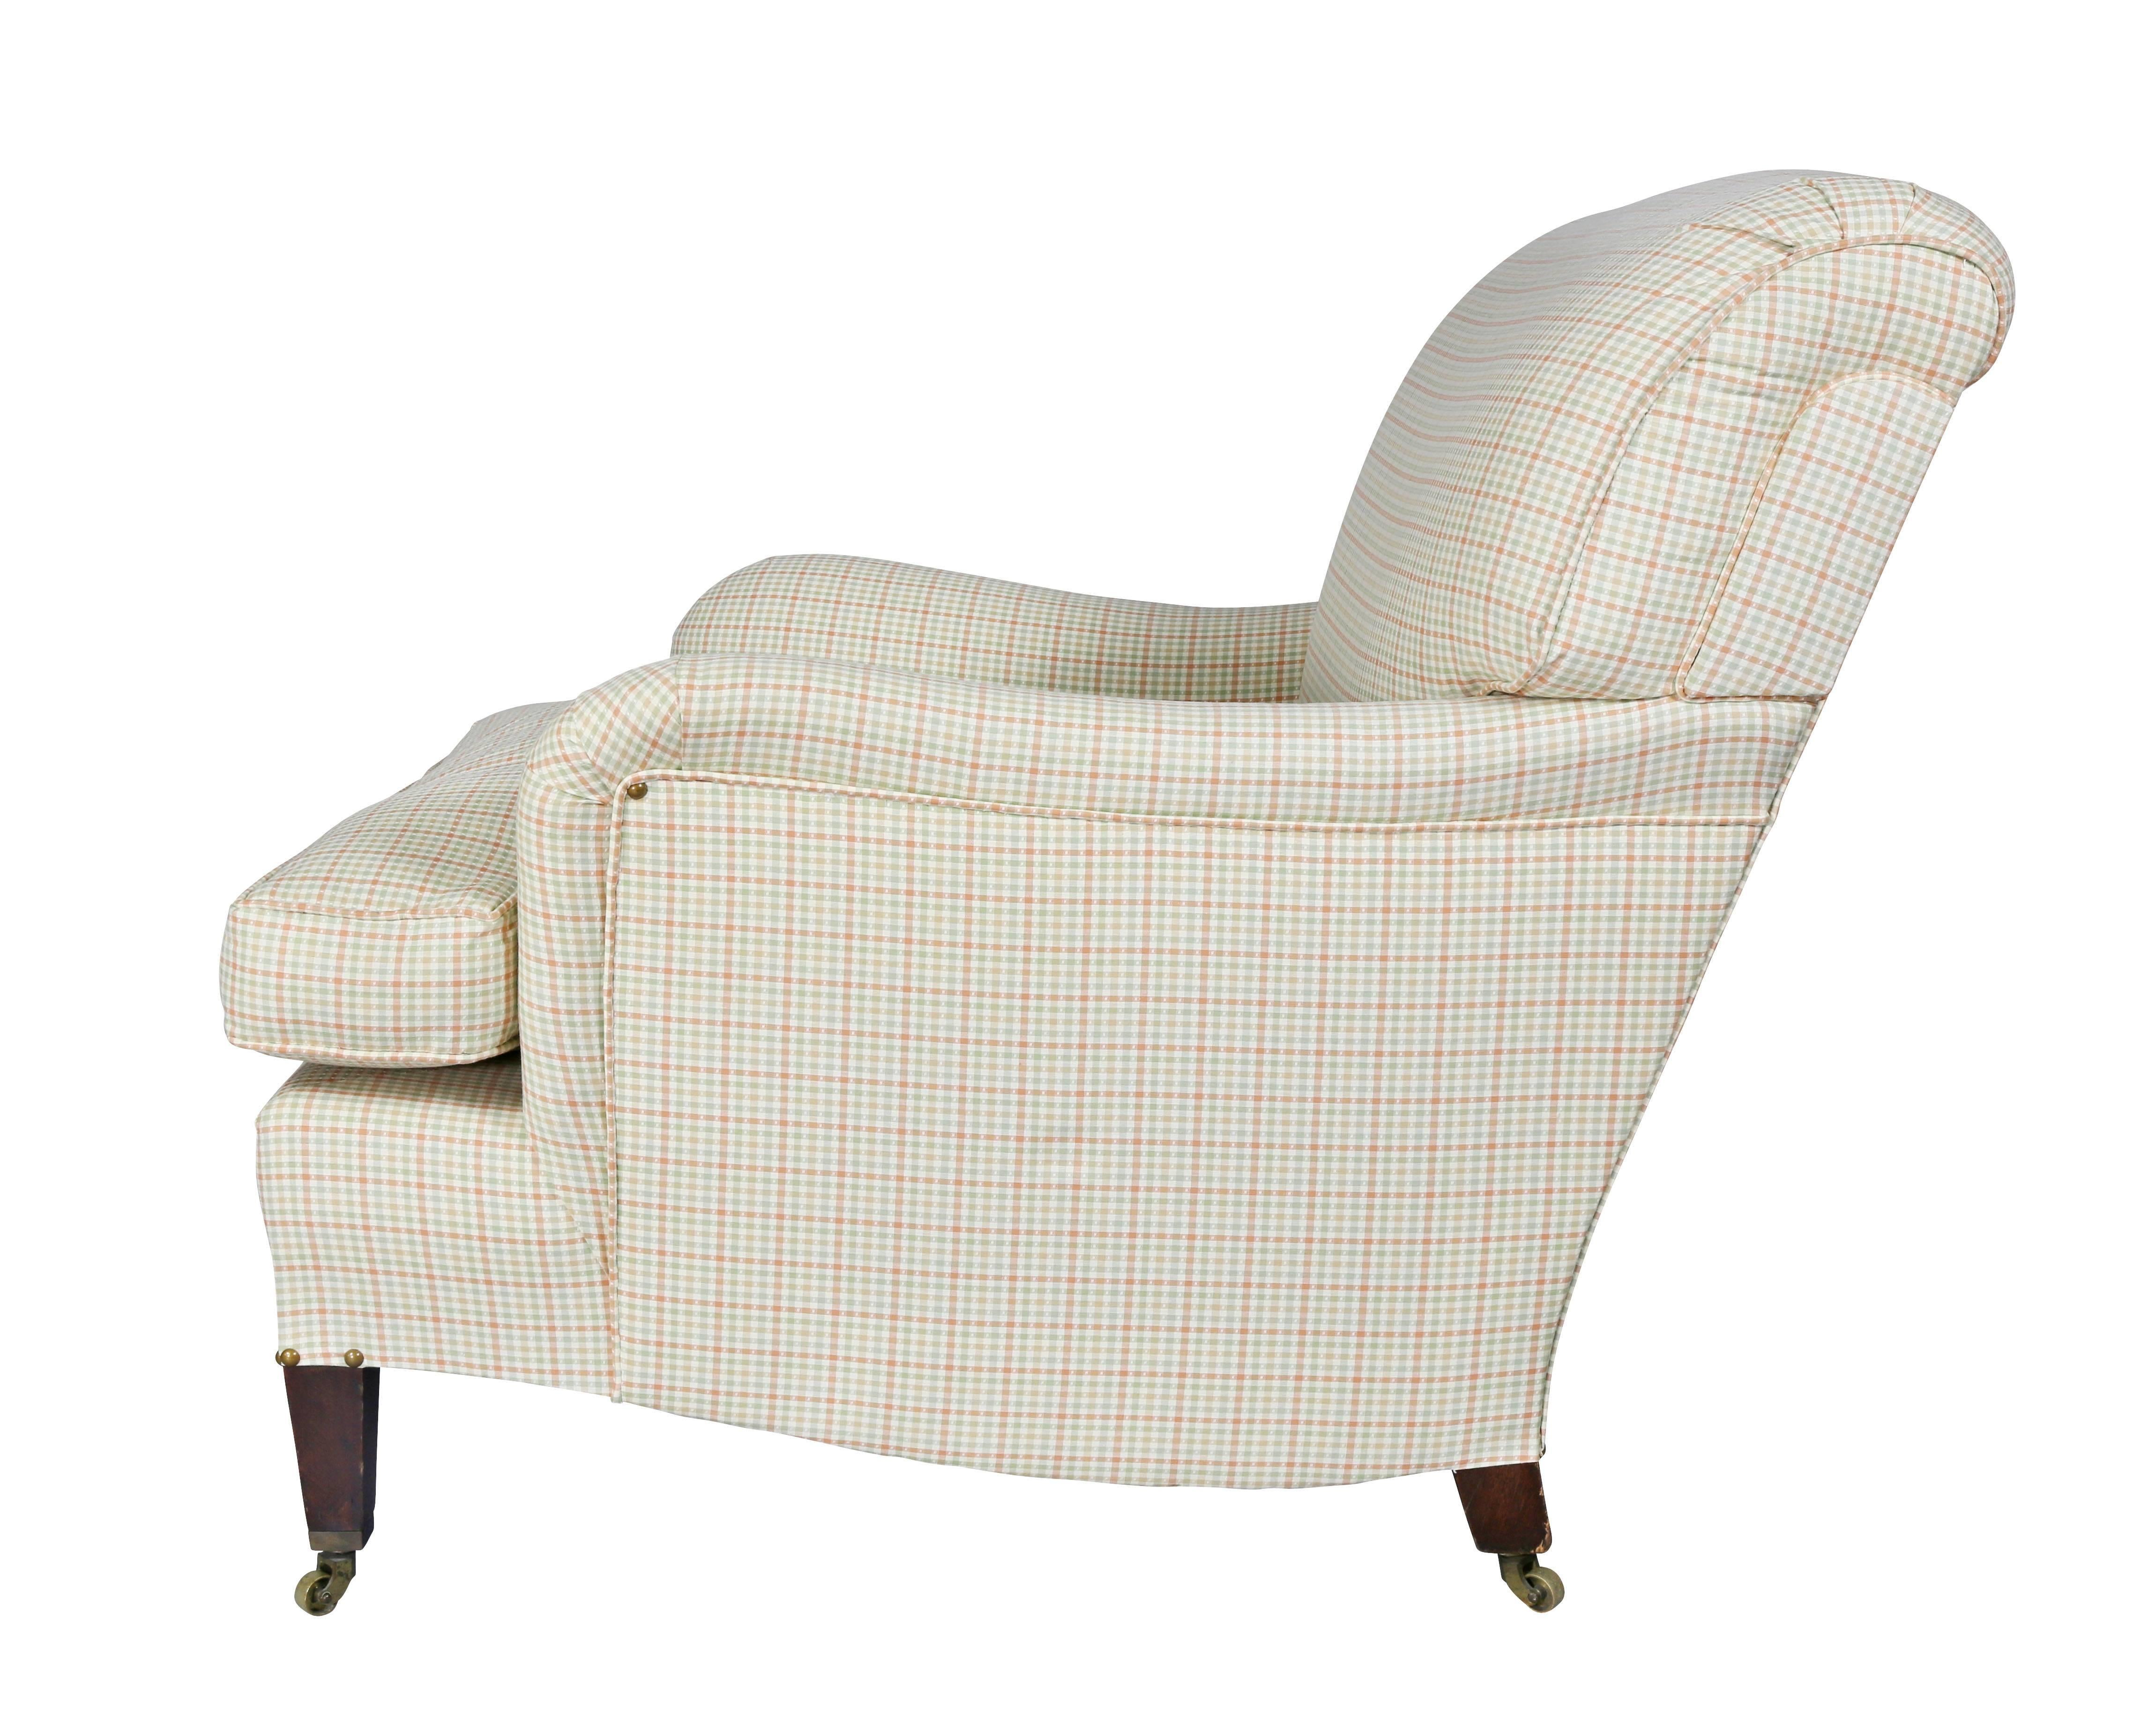 Edwardian Upholstered Armchair Attributed to Howard and Sons 